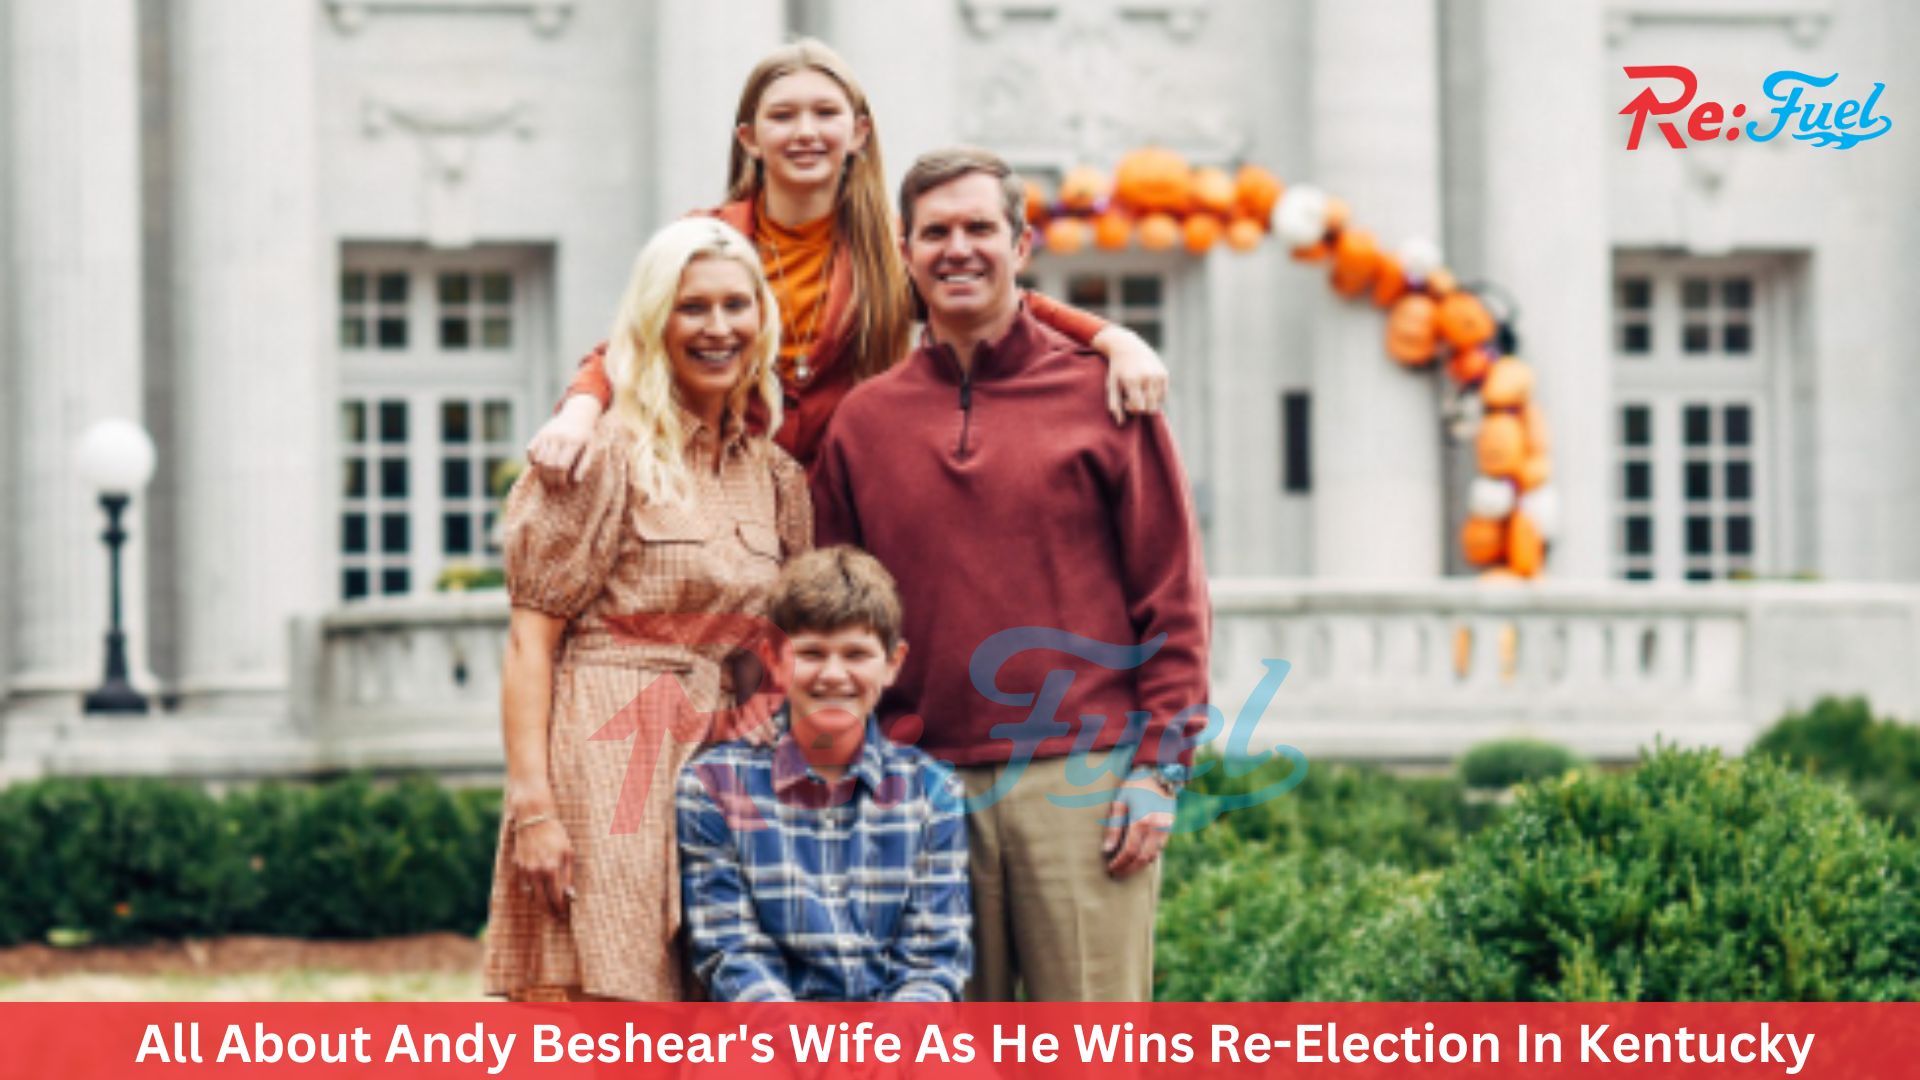 All About Andy Beshear's Wife As He Wins Re-Election In Kentucky